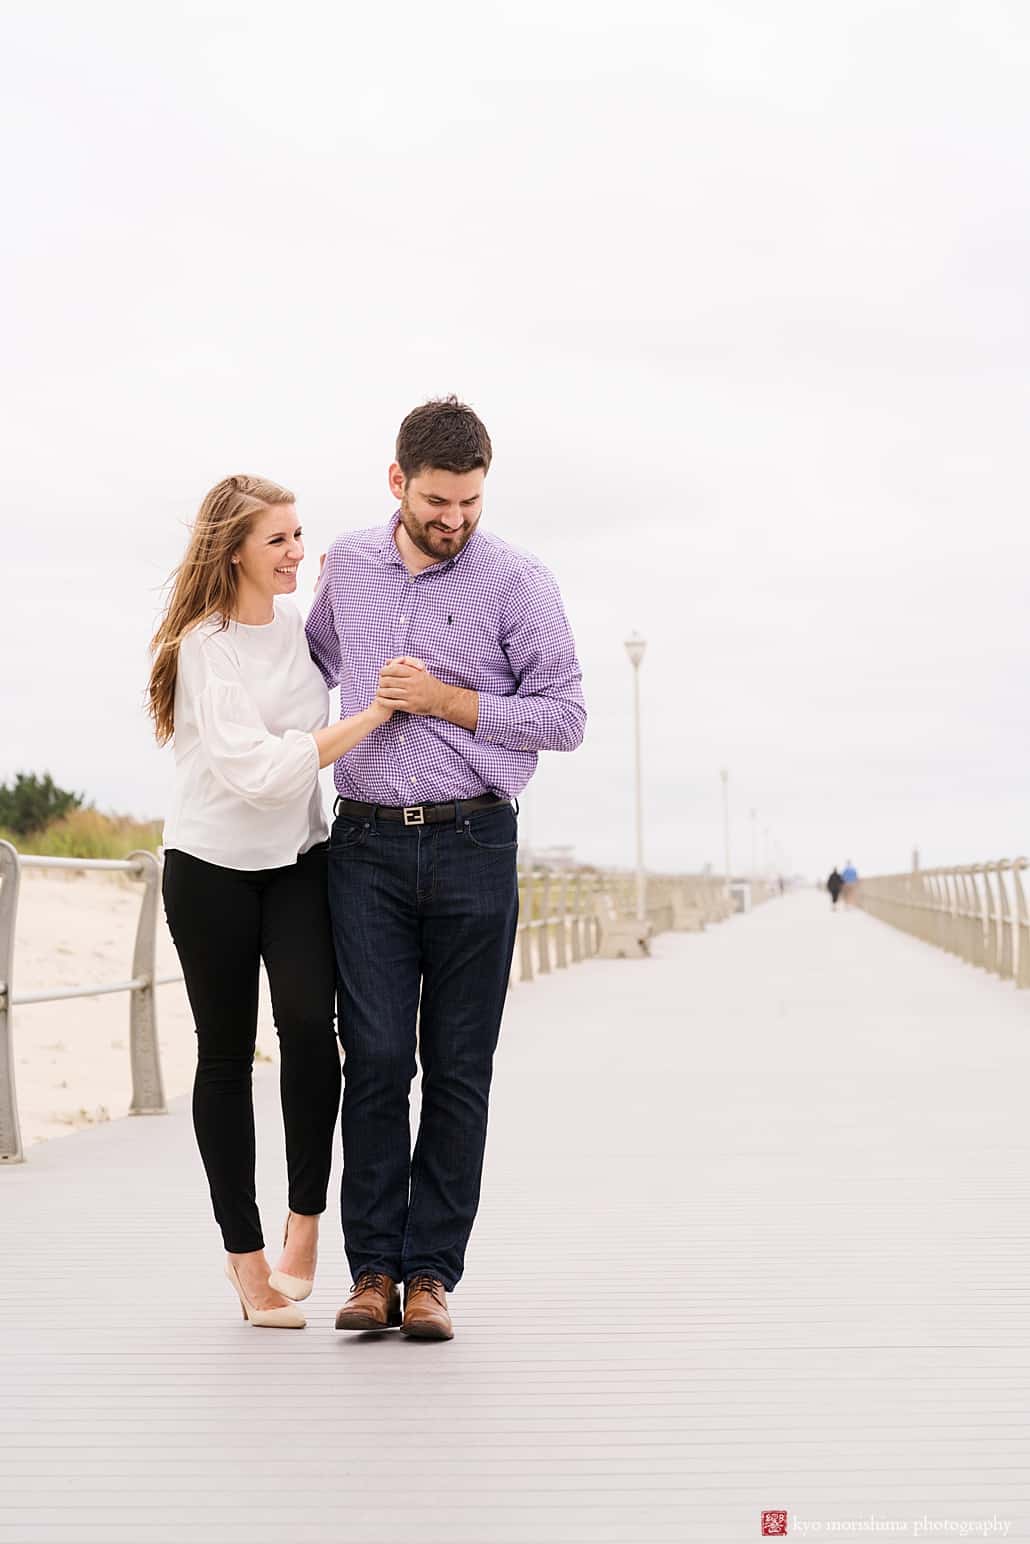 Spring Lake beach Engagement portrait boardwalk dance couple bride and groom Photos by Kyo Morishima Photography